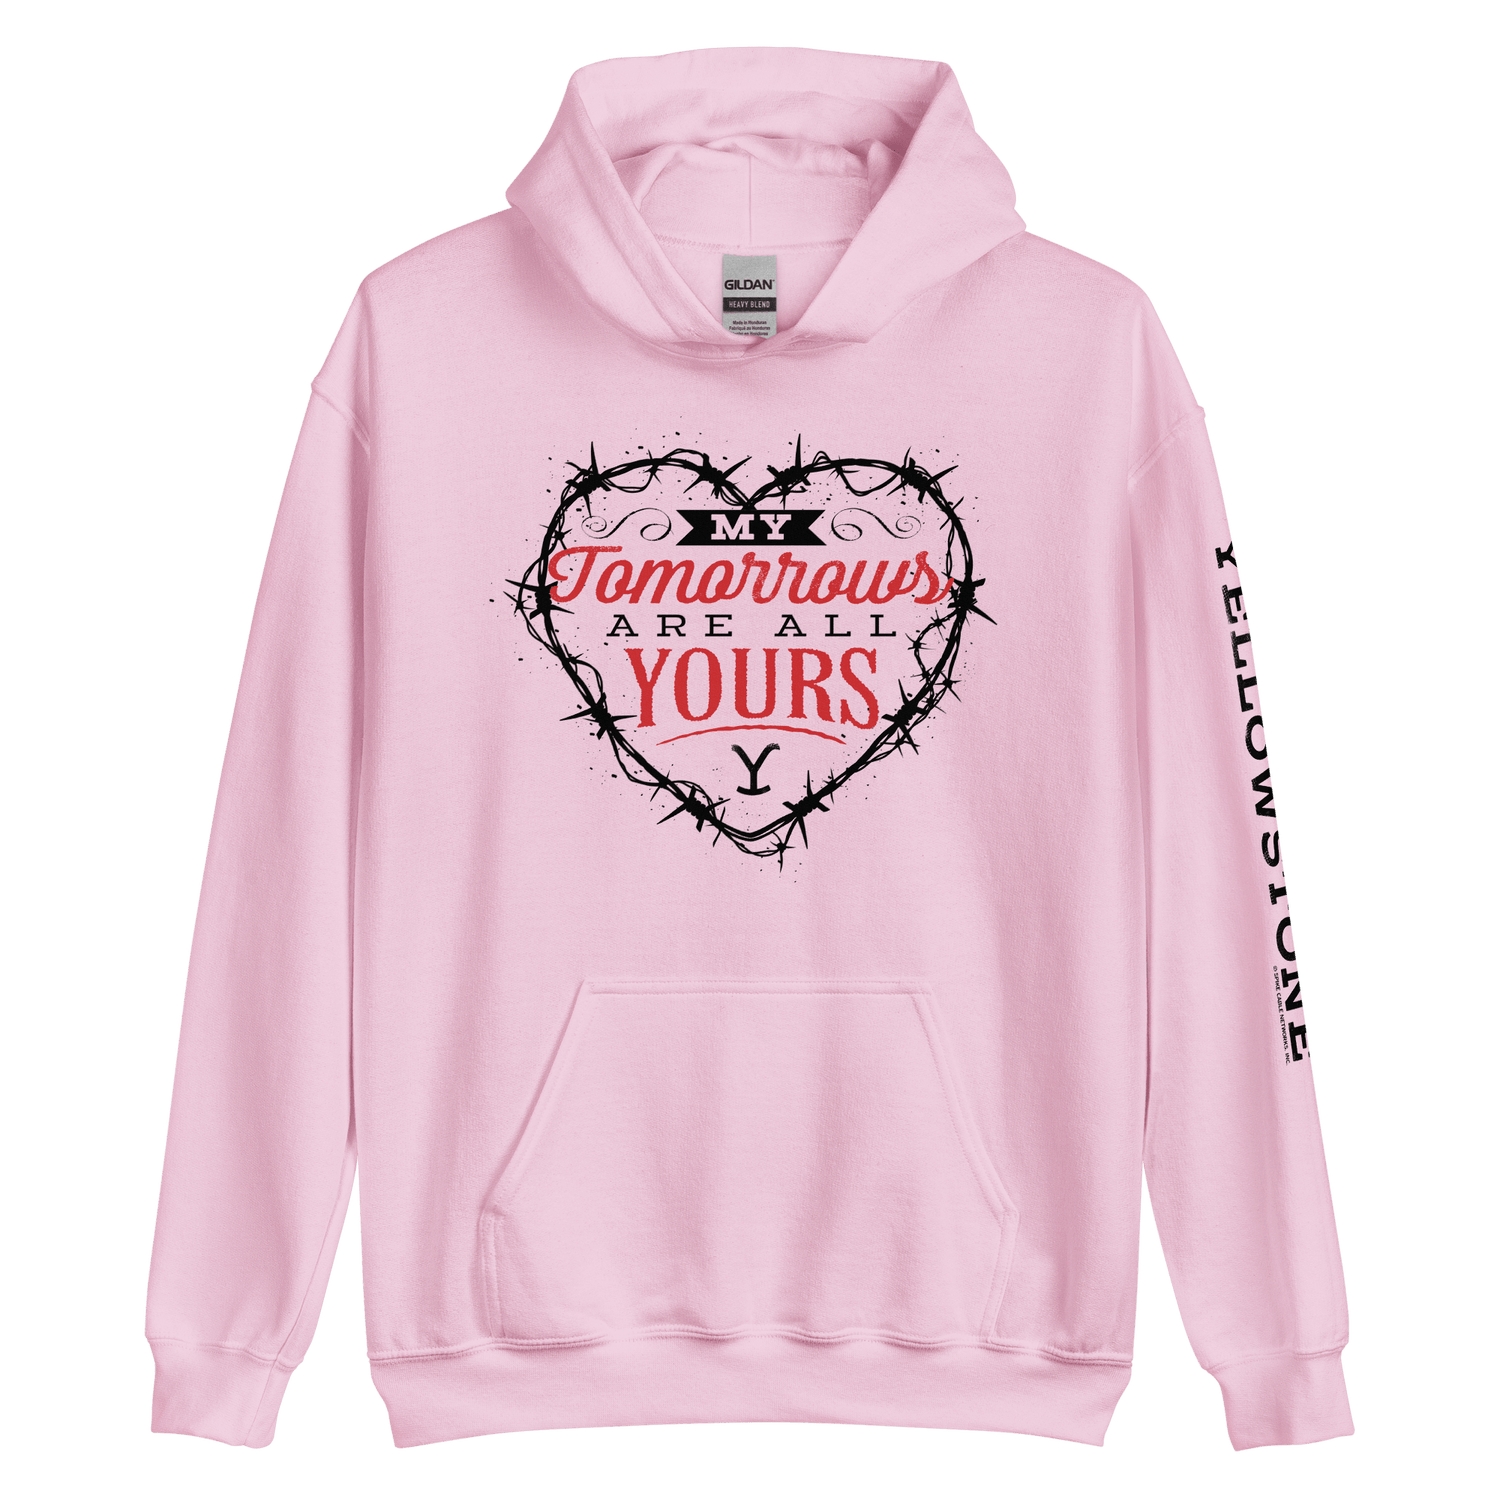 Yellowstone My Tomorrows Are All Yours Hooded Sweatshirt - Paramount Shop